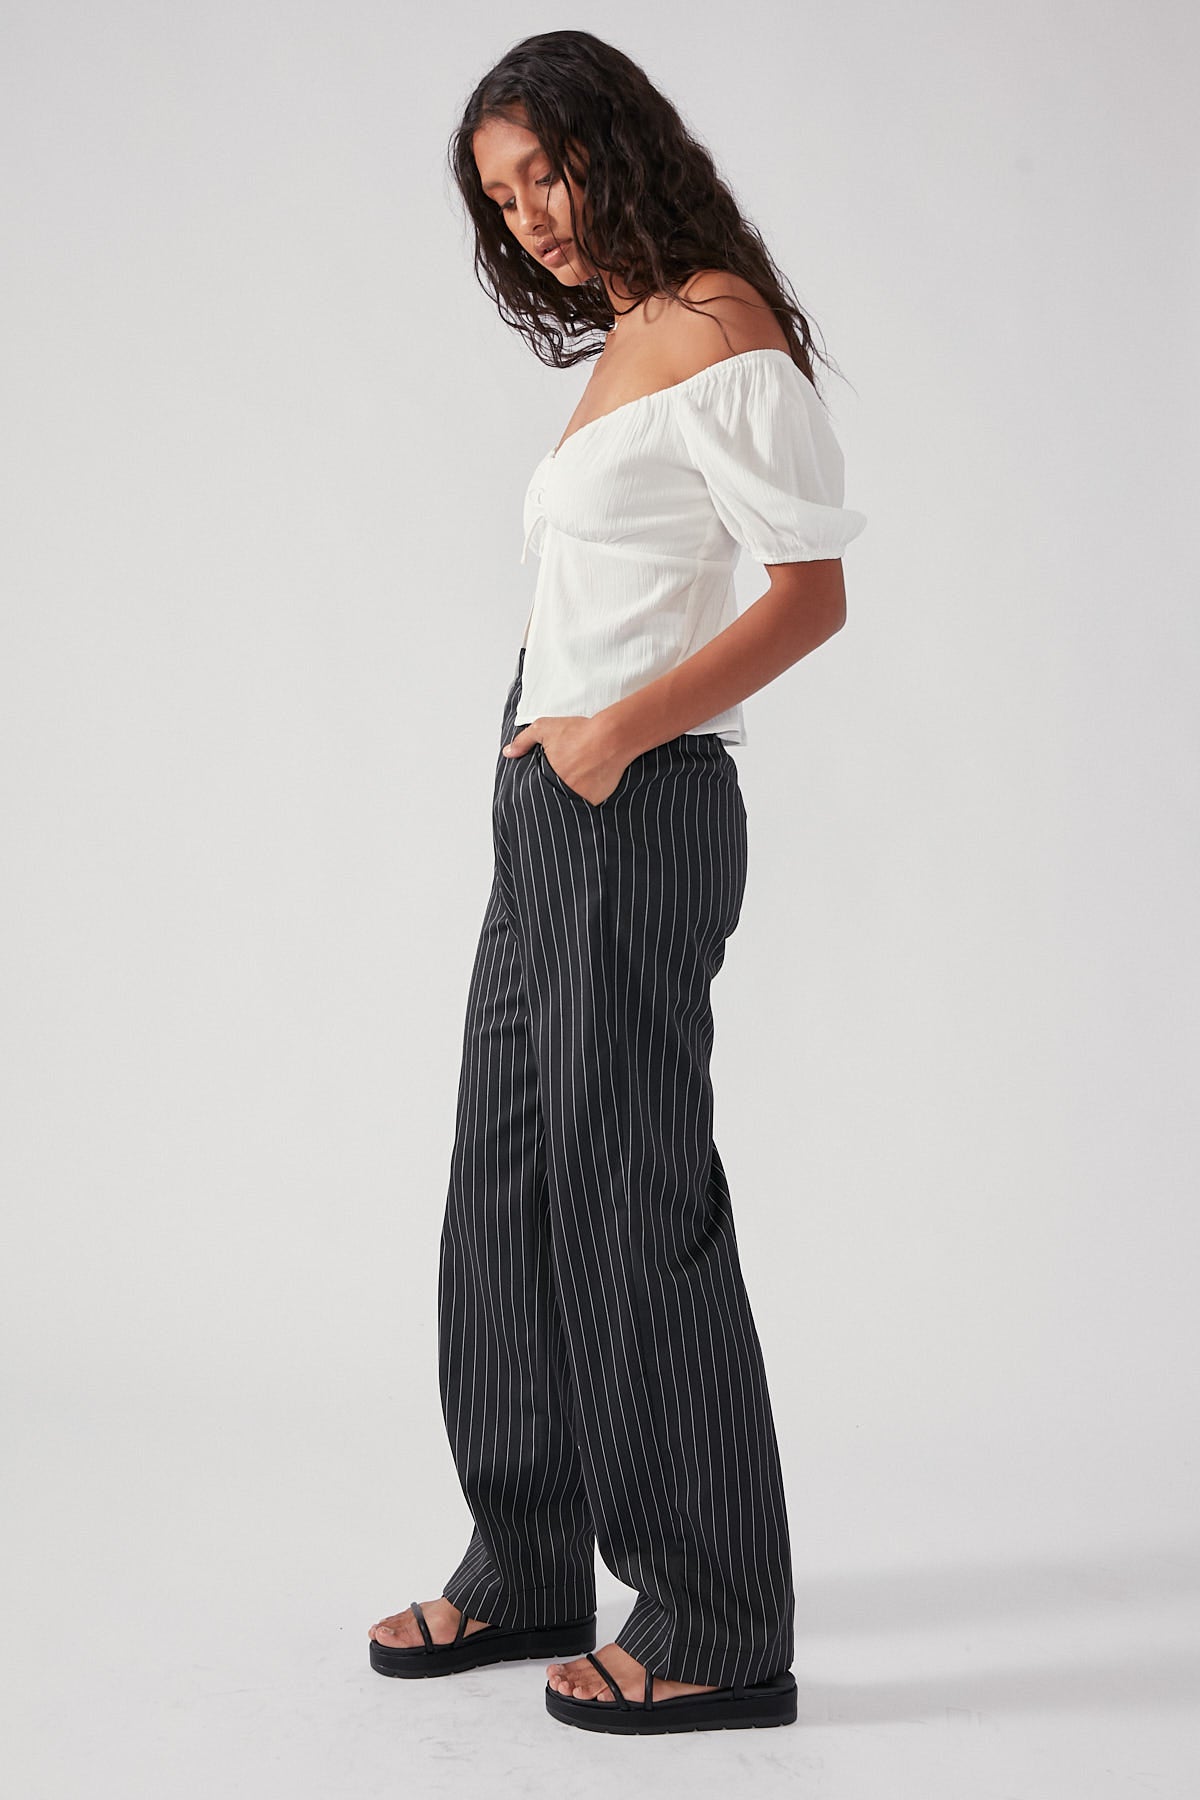 Perfect Stranger Stay With Me Pant Black Pinstripe